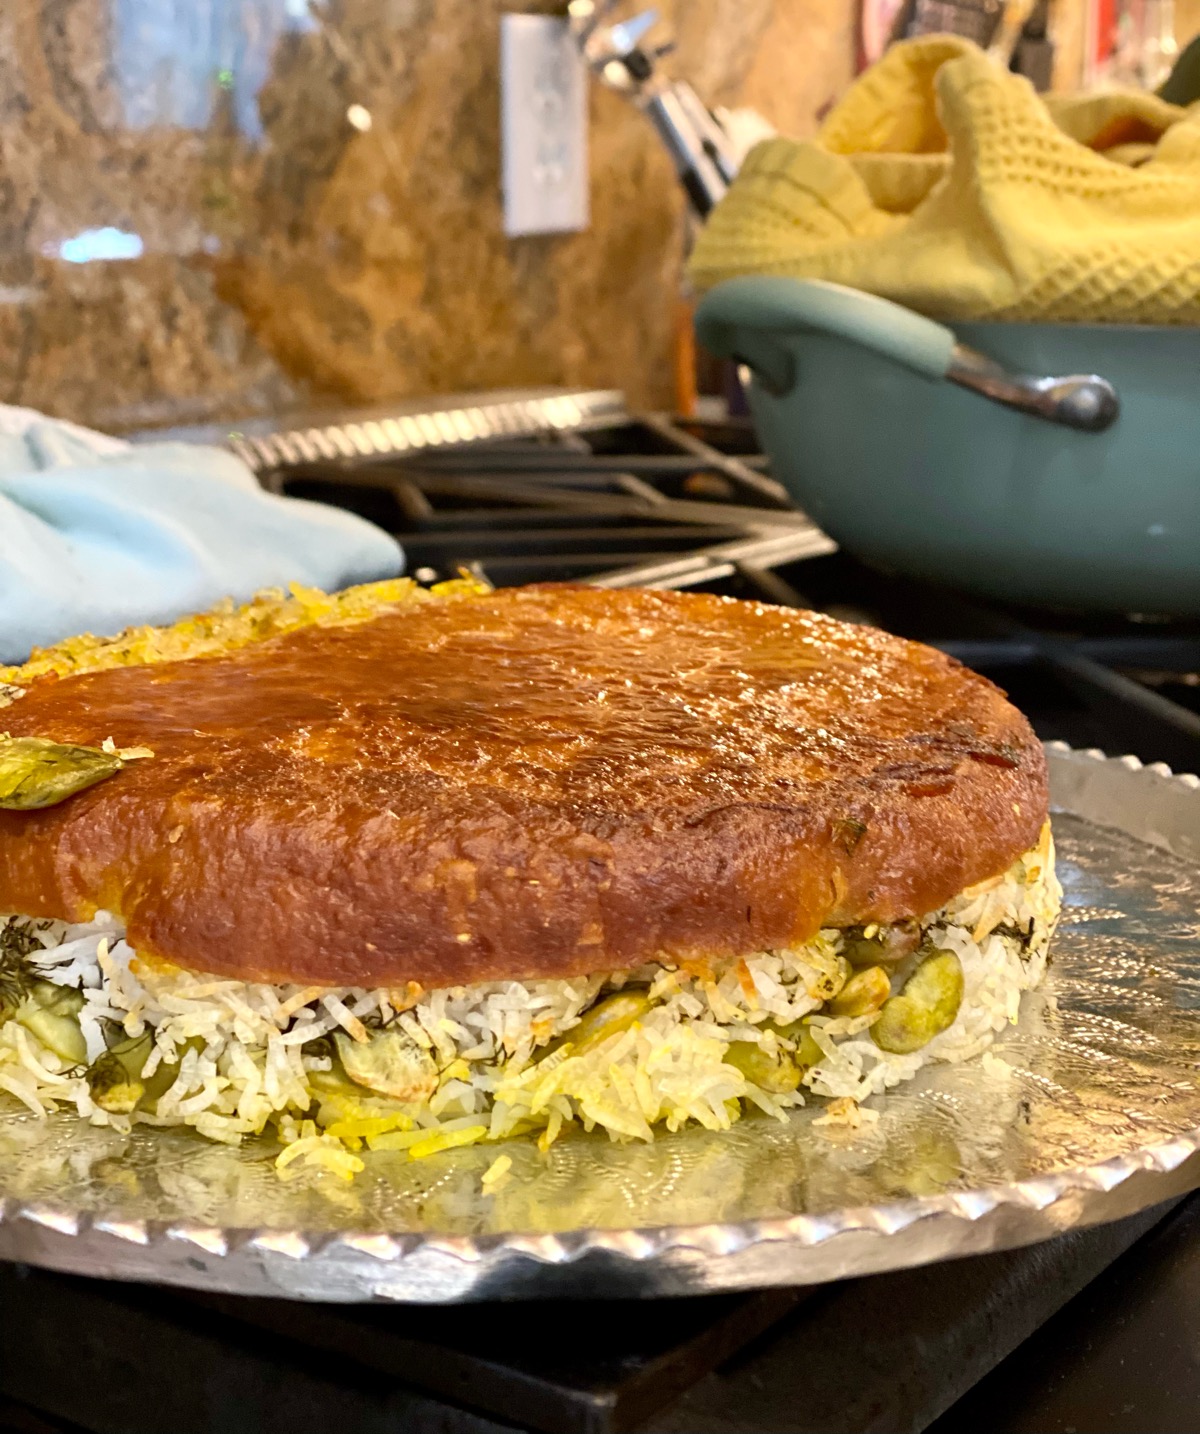 https://ovenhug.com/wp-content/uploads/2020/08/Baghali-Polo-with-Bread-Tahdig.jpg